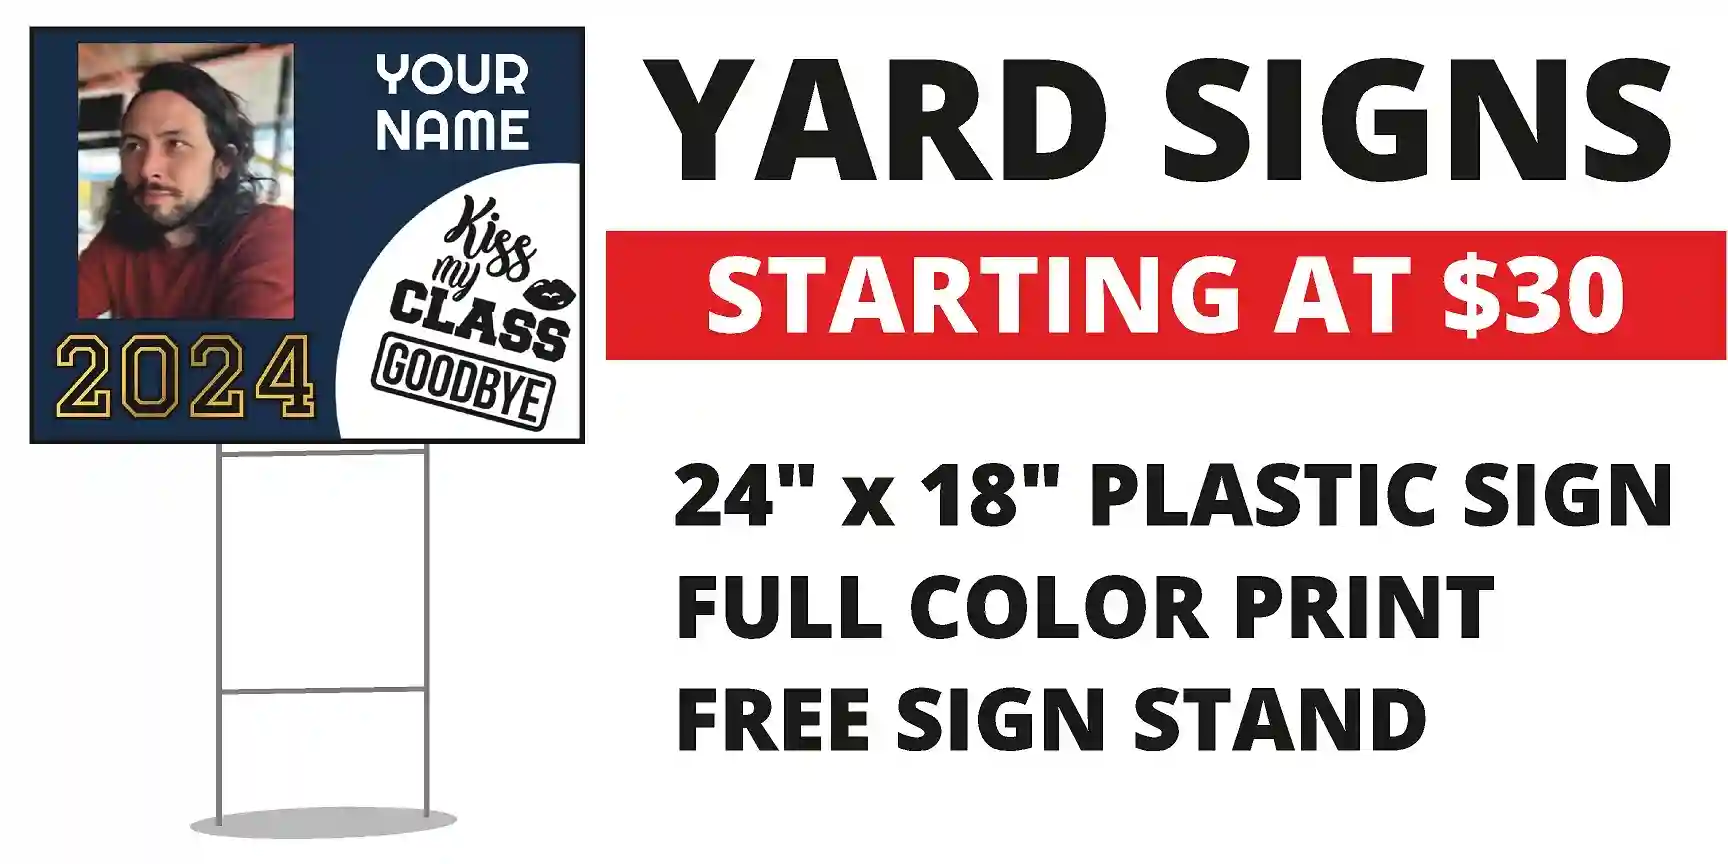 Graduation yard sign prices. 24 x 18 Single sided print $30, double sided $38